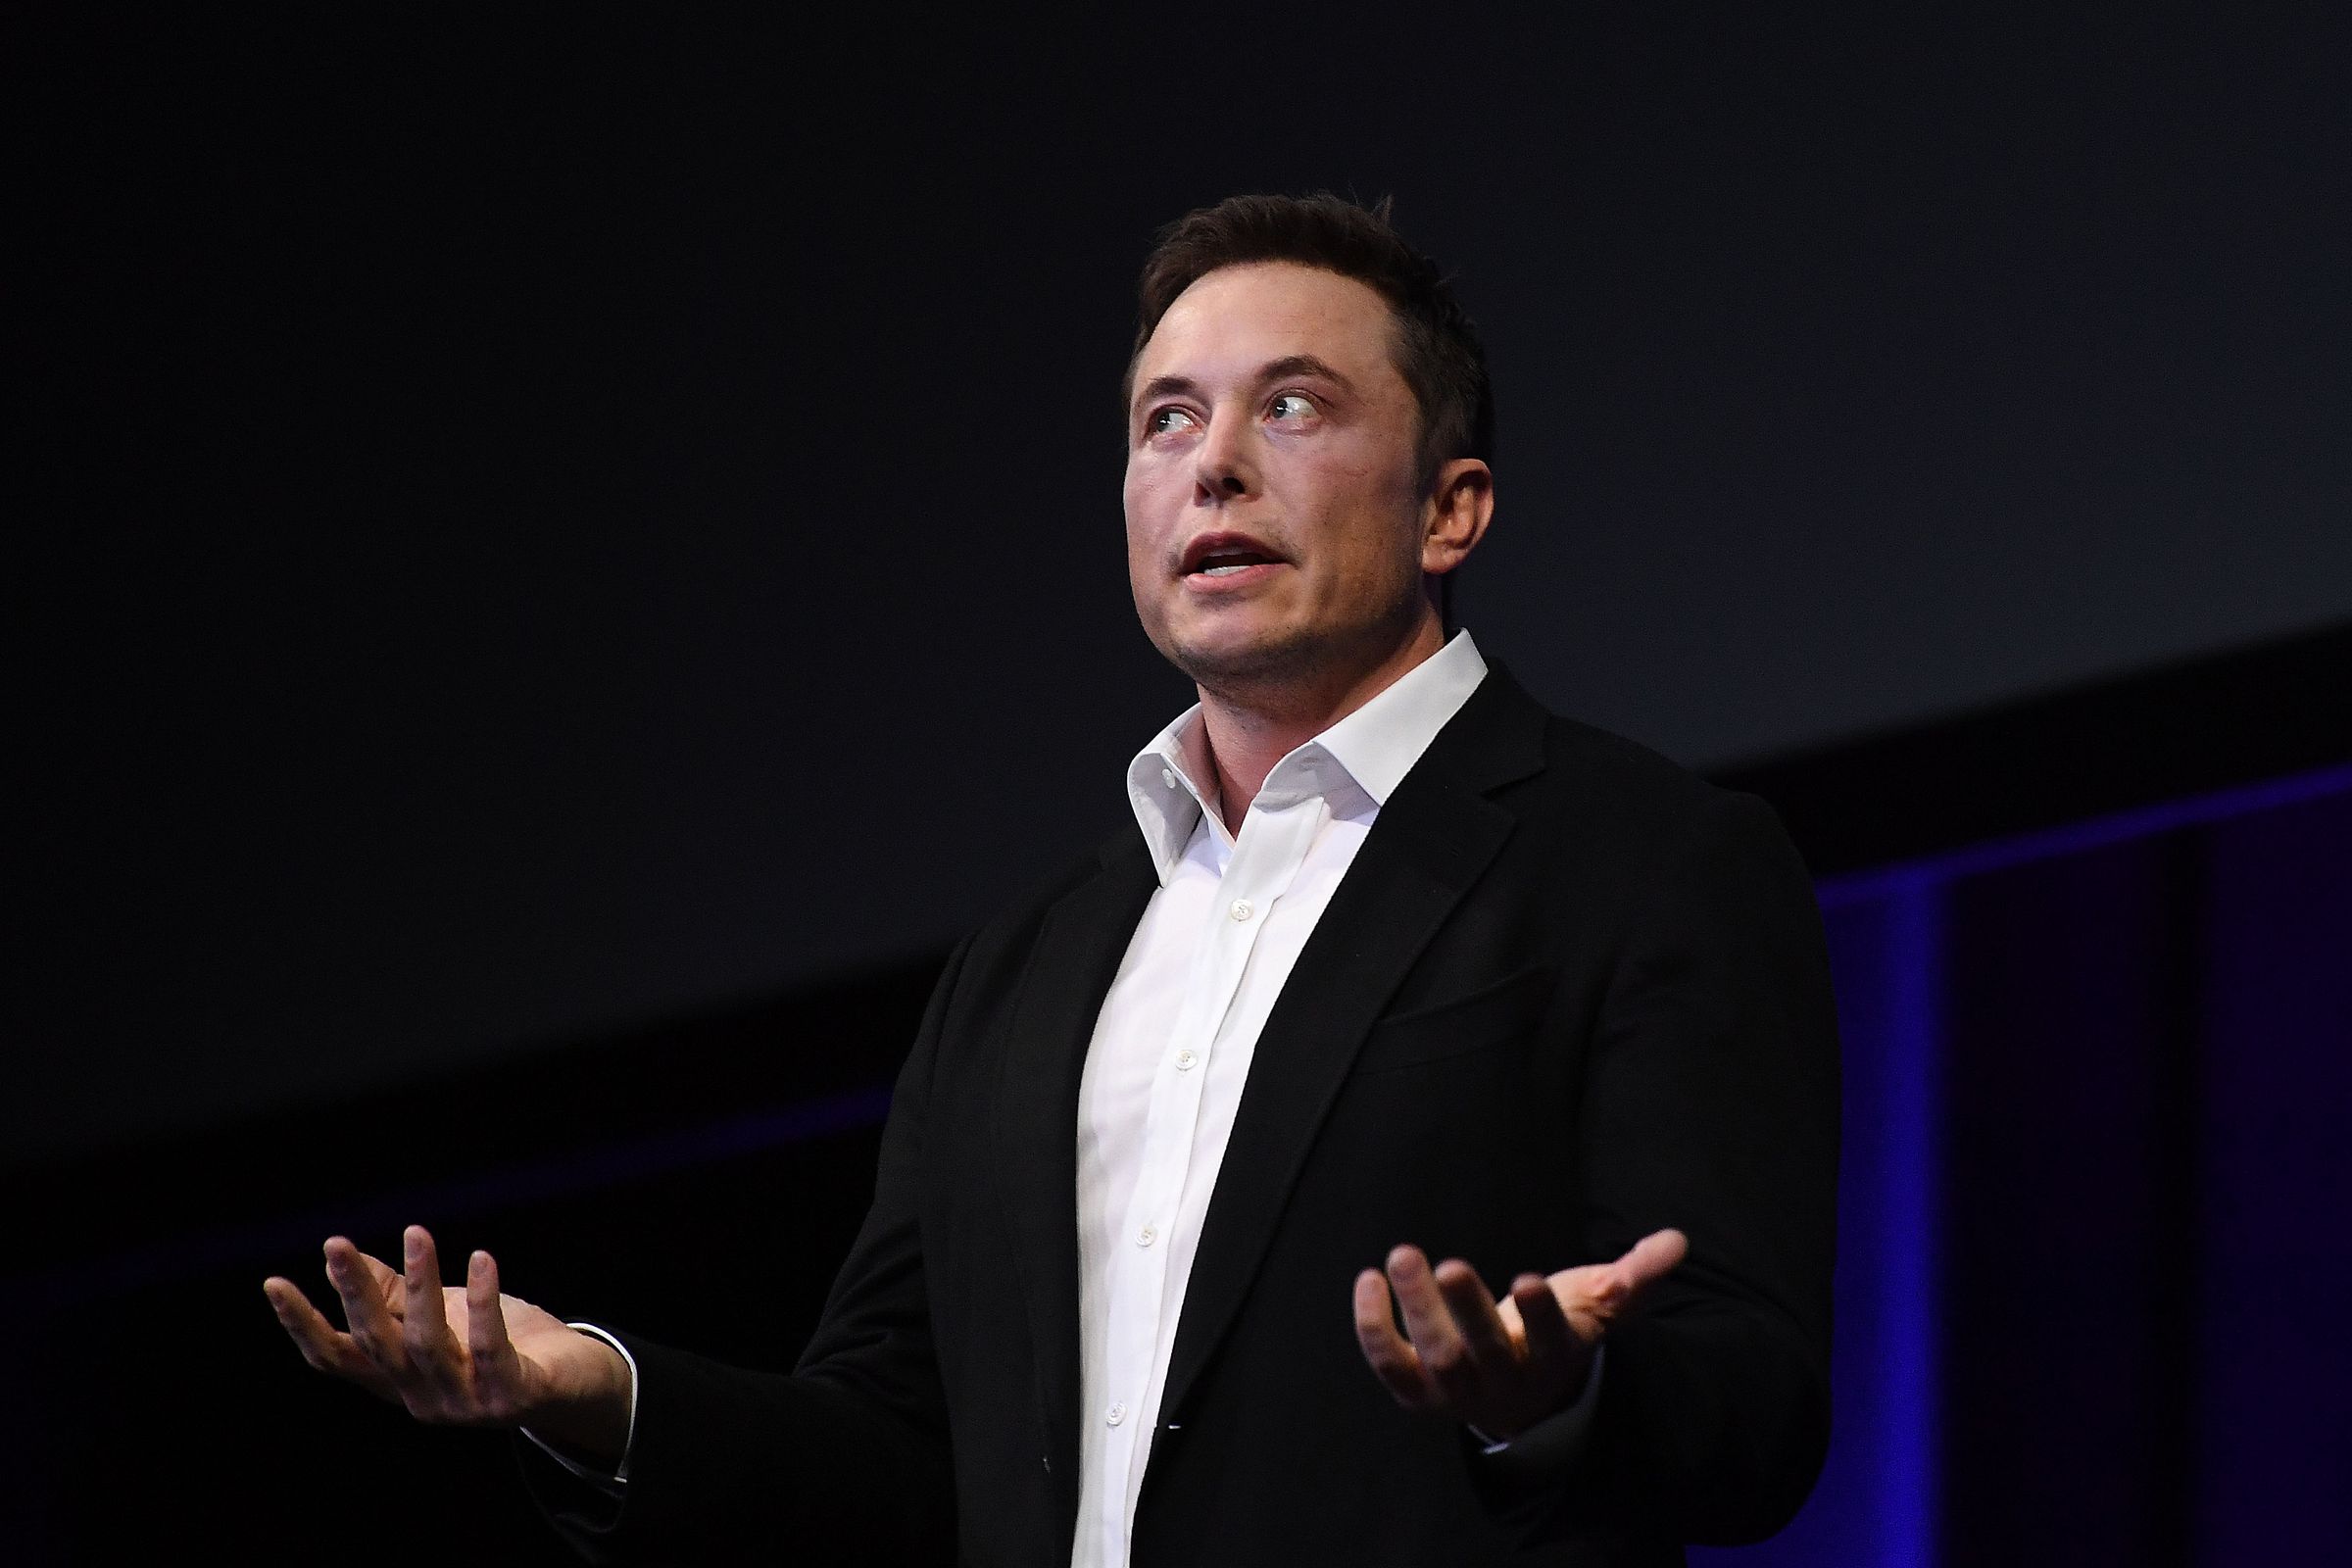 Elon Musk Presents SpaceX Plans To Colonise Mars